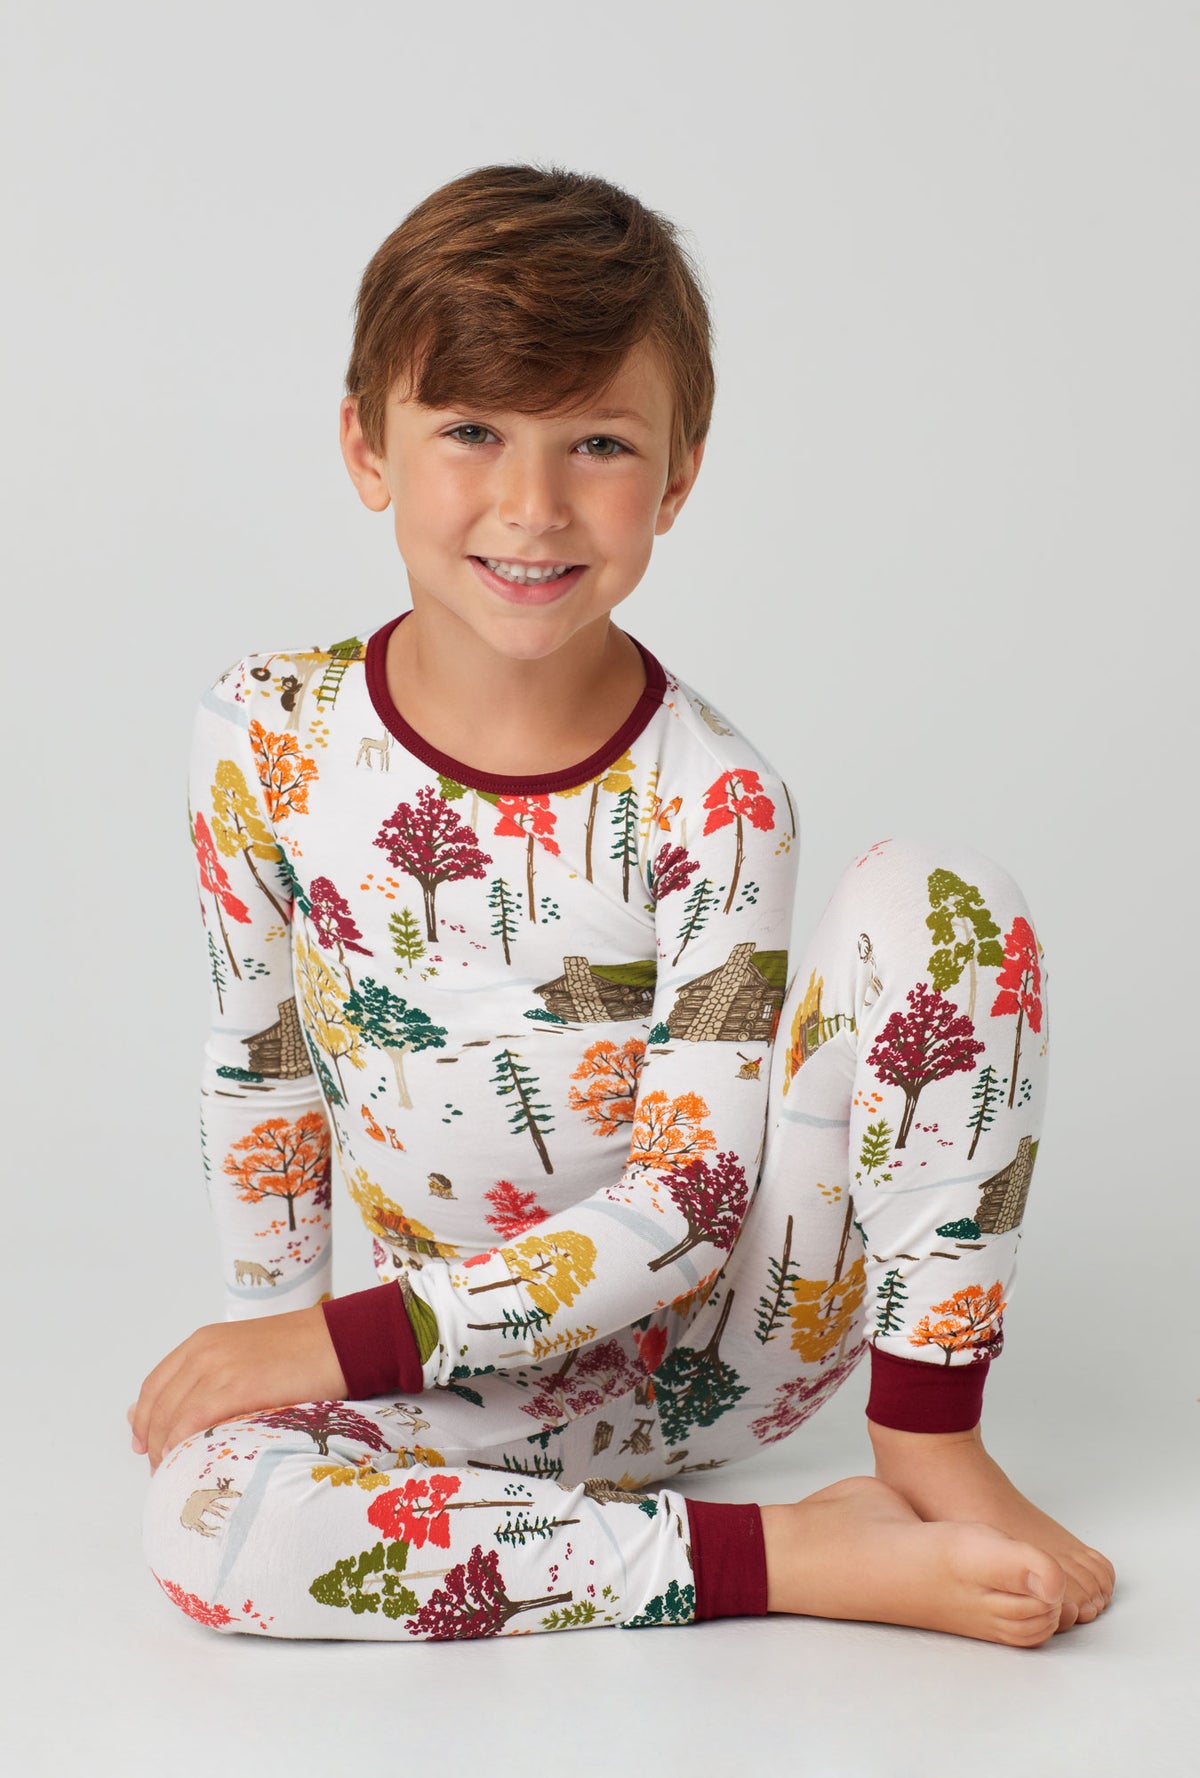 A boy wearing Long Sleeve Stretch Jersey PJ Set with forest retreat print